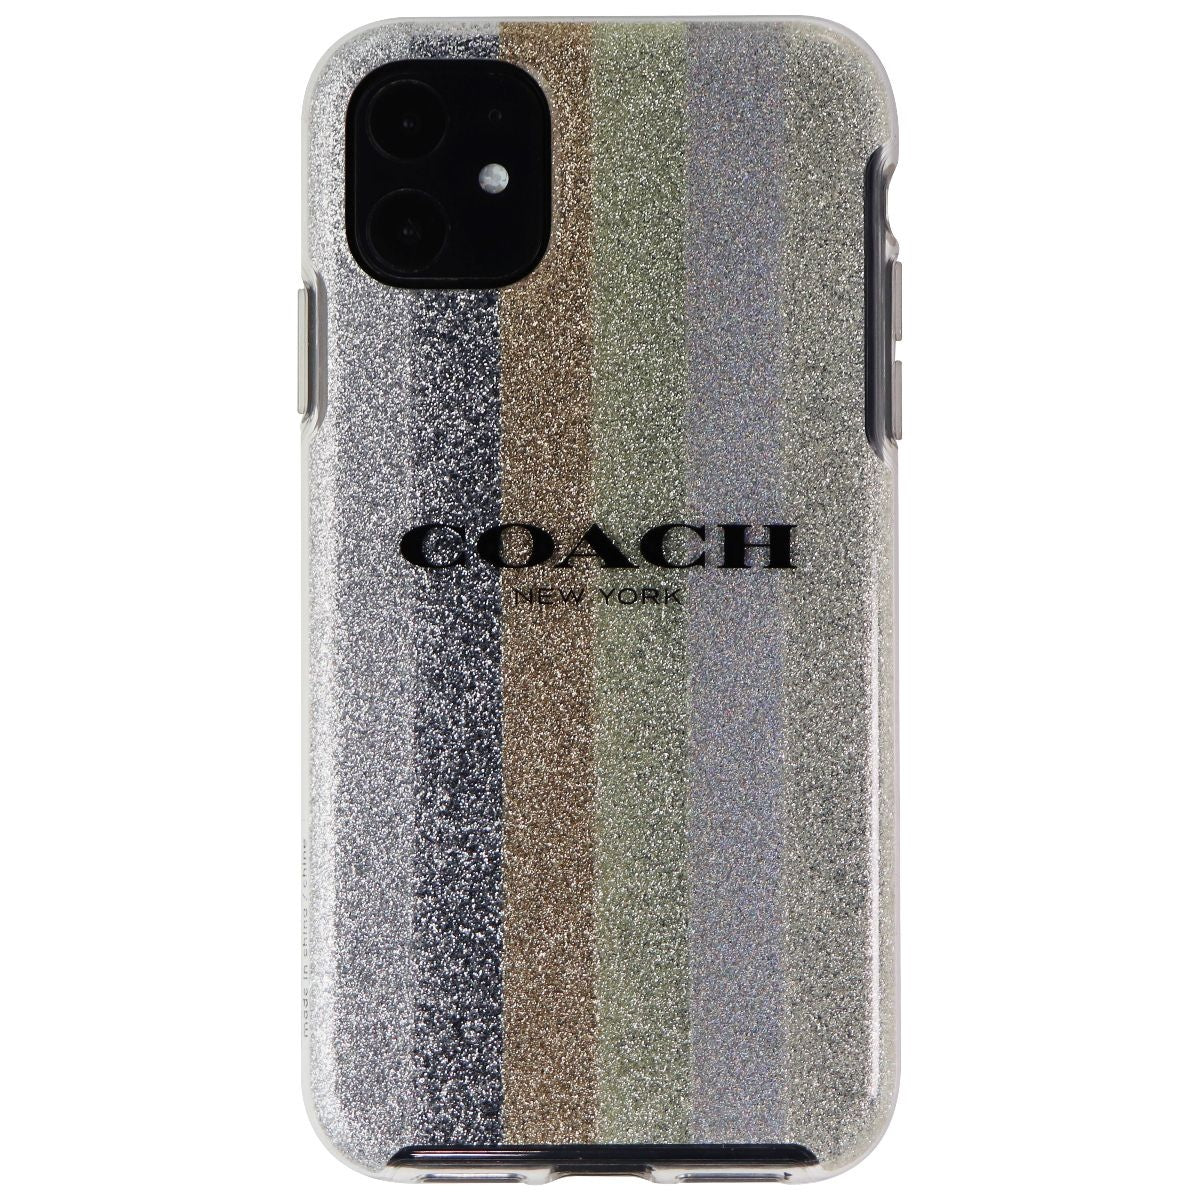 Coach Protective Case for Apple iPhone 11 (6.1-inch) - Glitter Americana